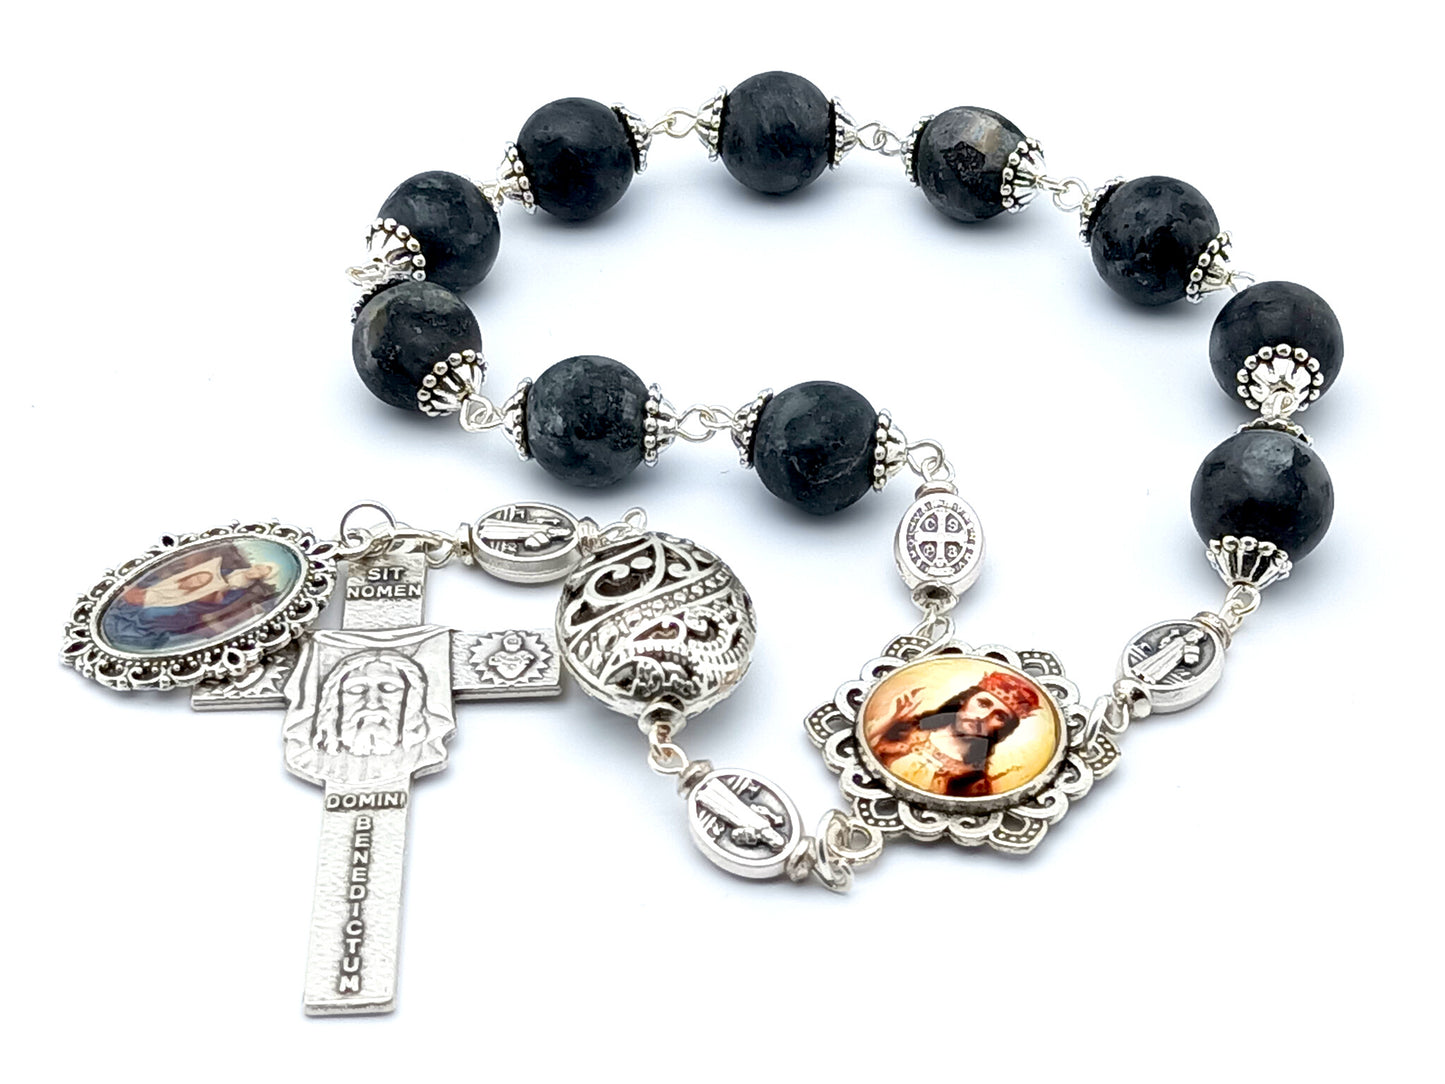 Christ the King single decade gemstone rosary Veronicas veil crucifix and medal.